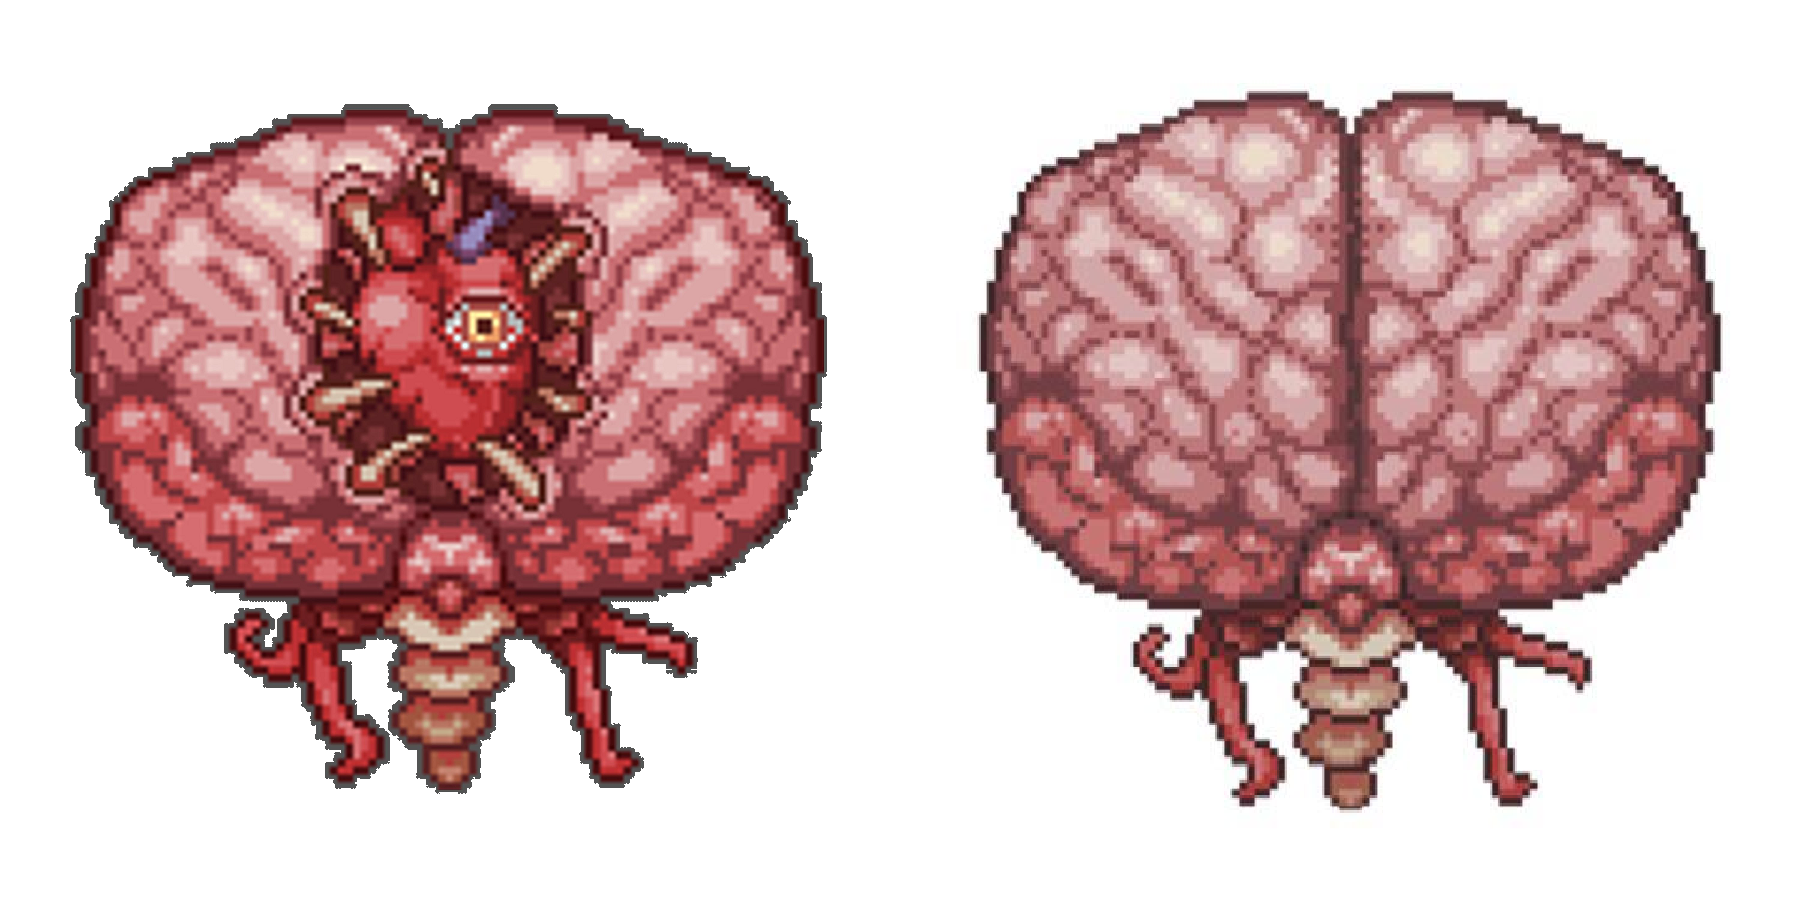 Side by side comparison of the Brain of Cthulhu's phases from Terraria